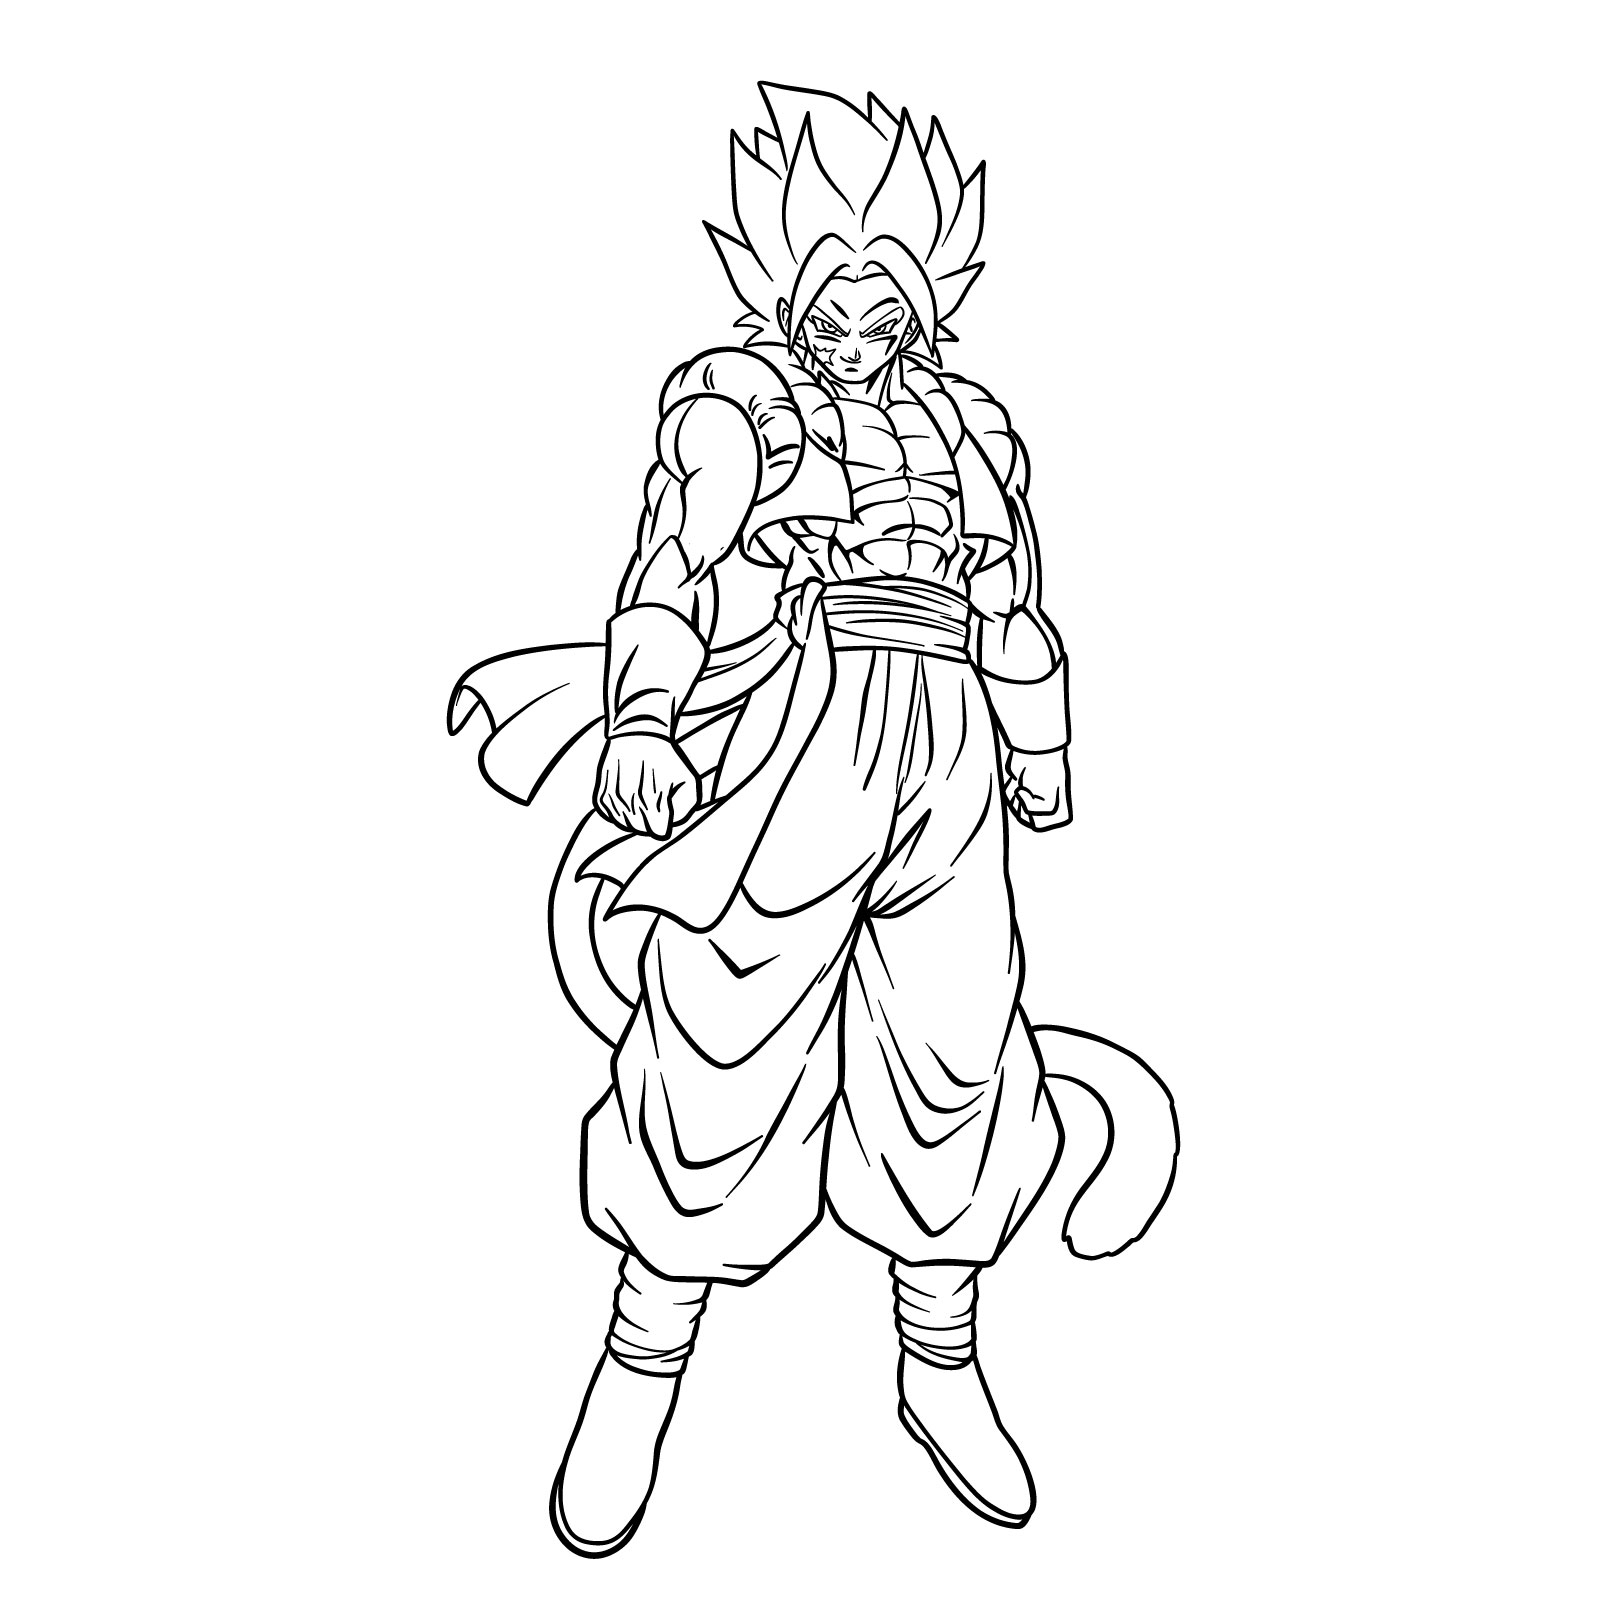 Easy step by step drawing of Shallet, the fusion of the twin brothers, Shallot and Giblet from Dragon Ball - final step